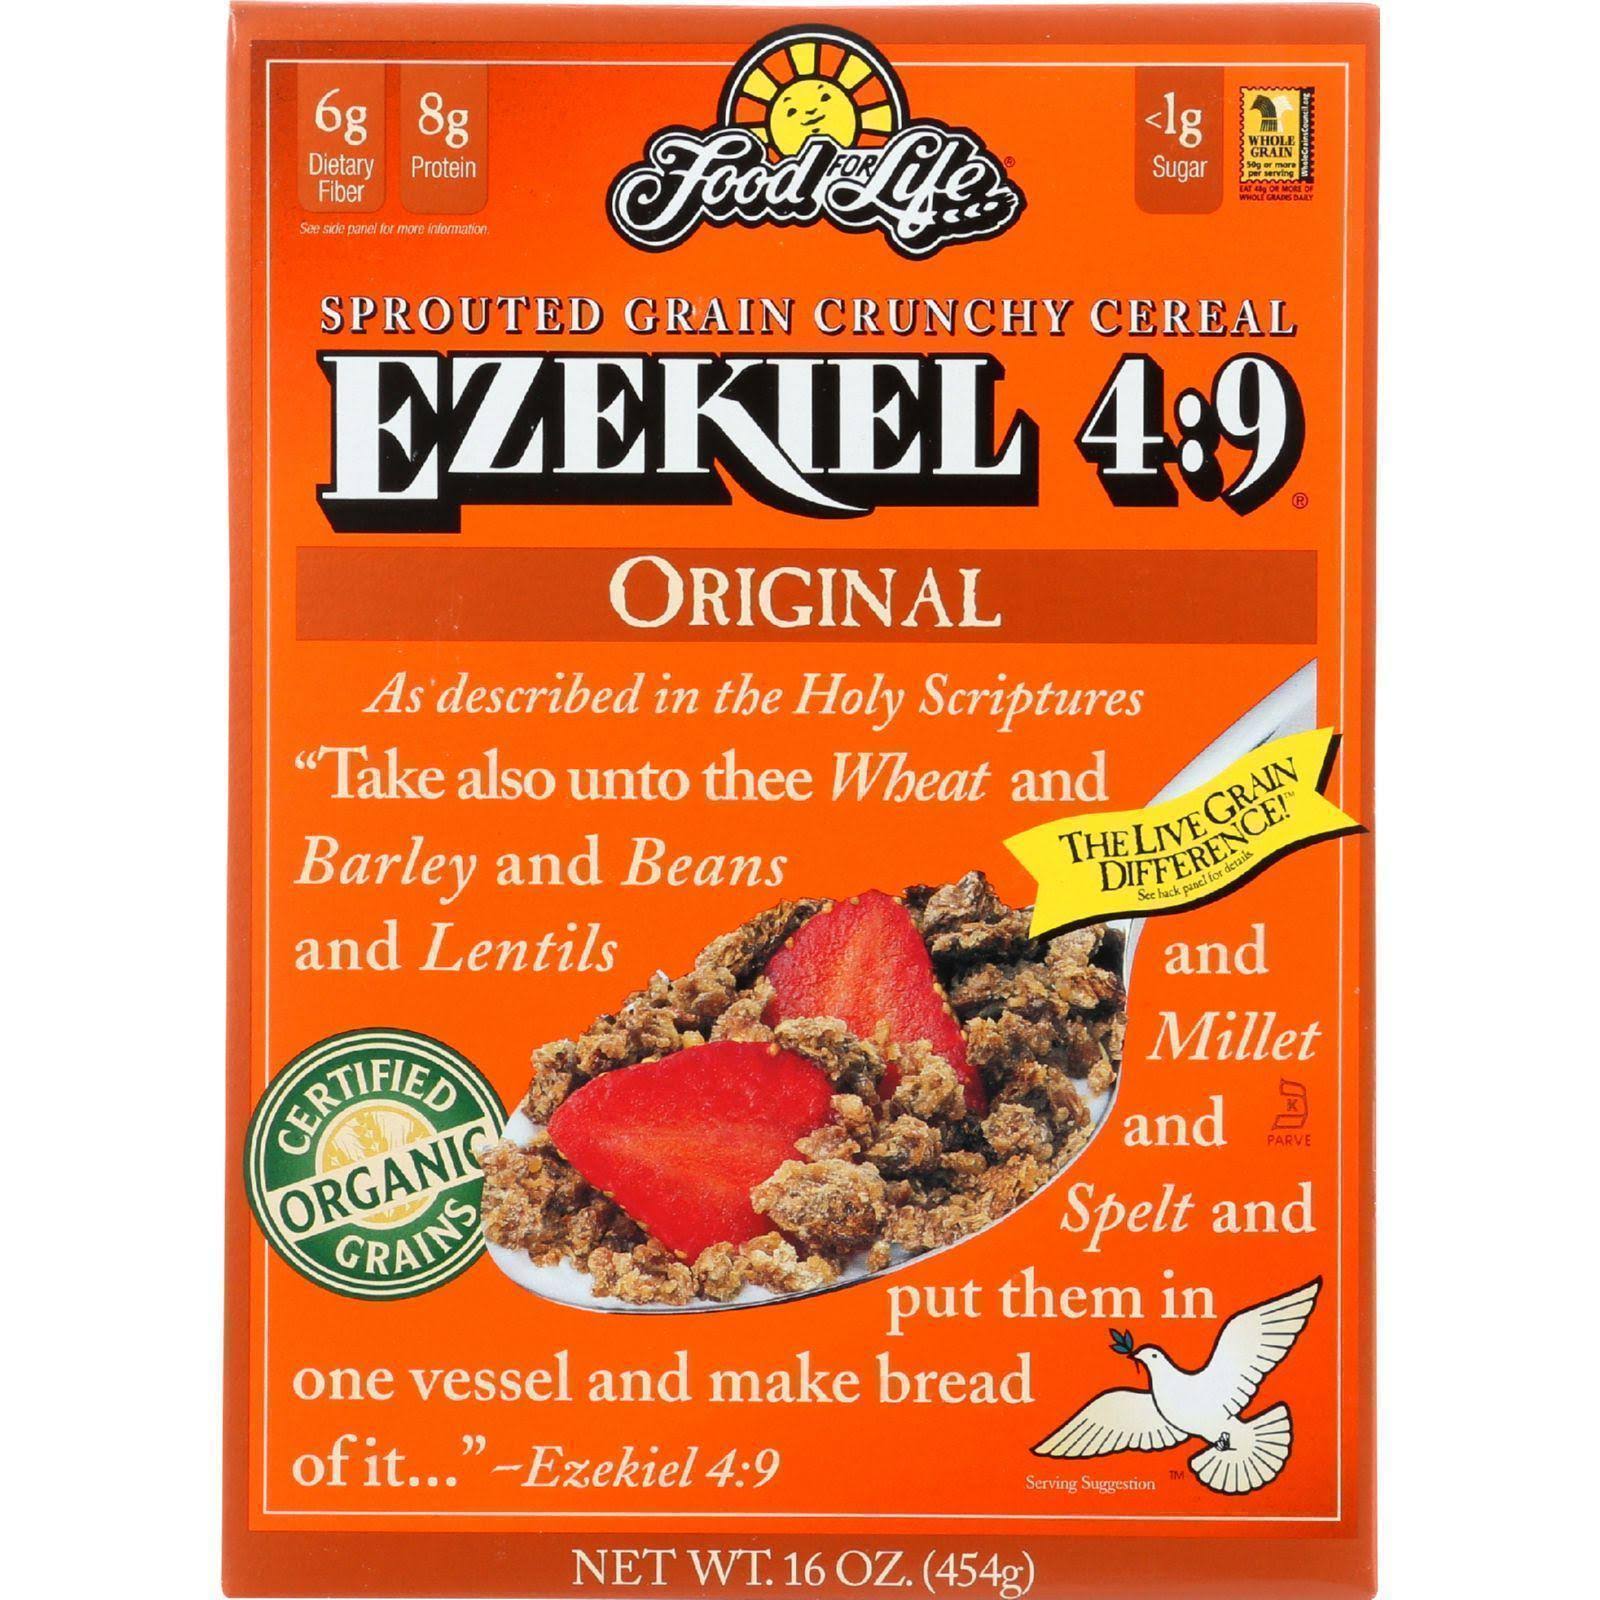 Food For Life Ezekiel 4:9 Sprouted Grain Crunchy Cereal